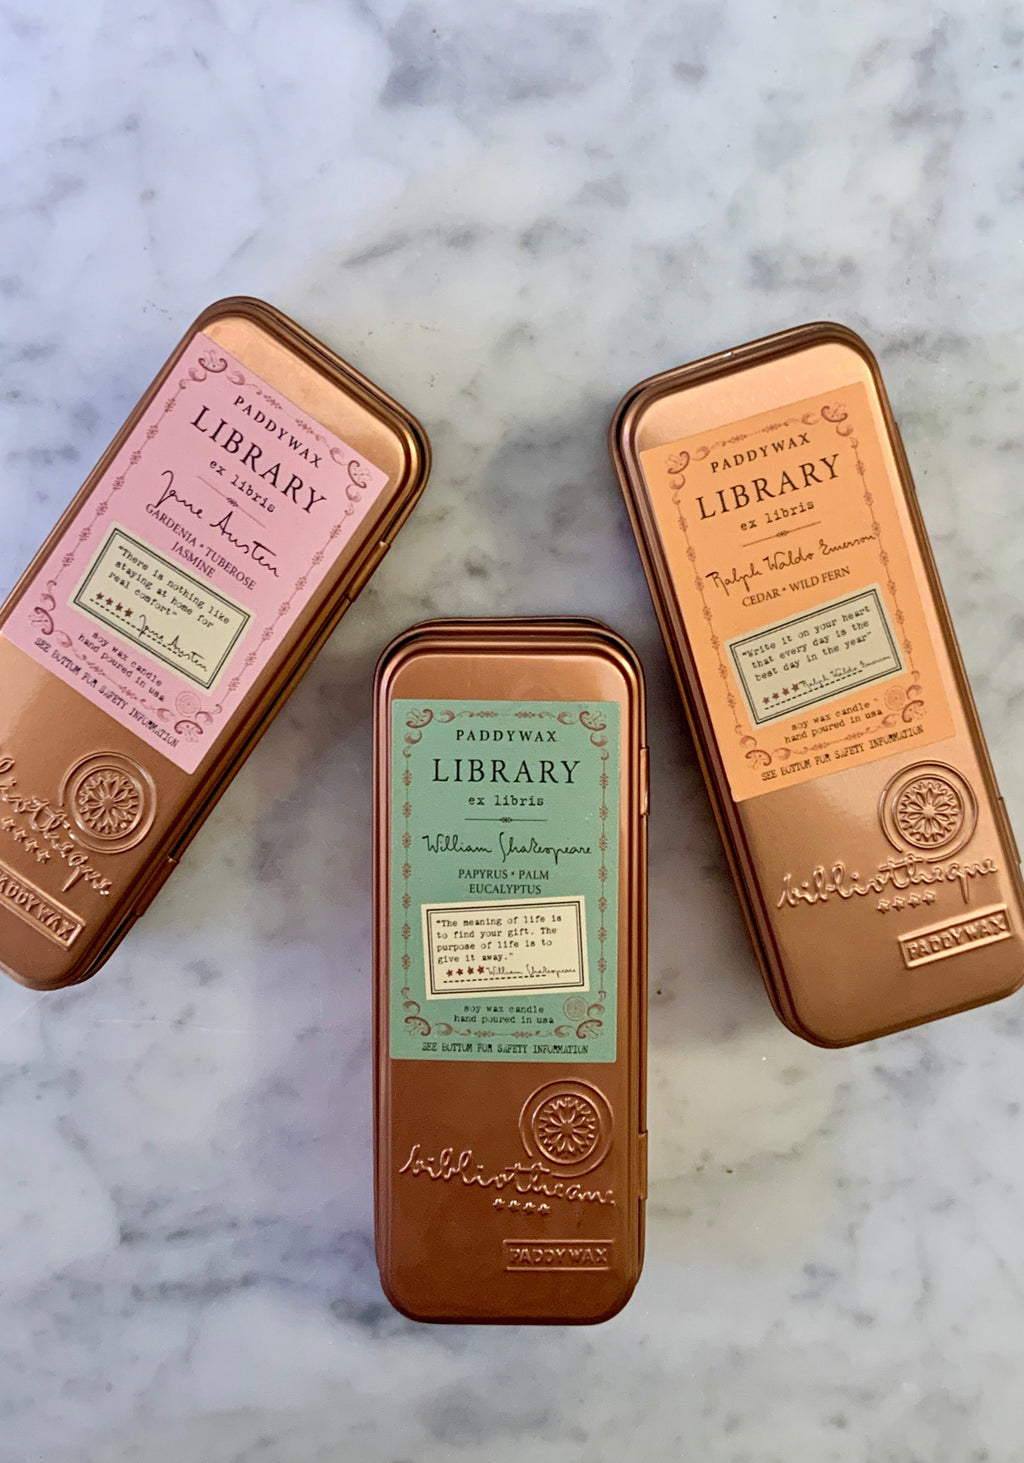 Library Travel Candle: Austen, Emerson, and Shakespeare